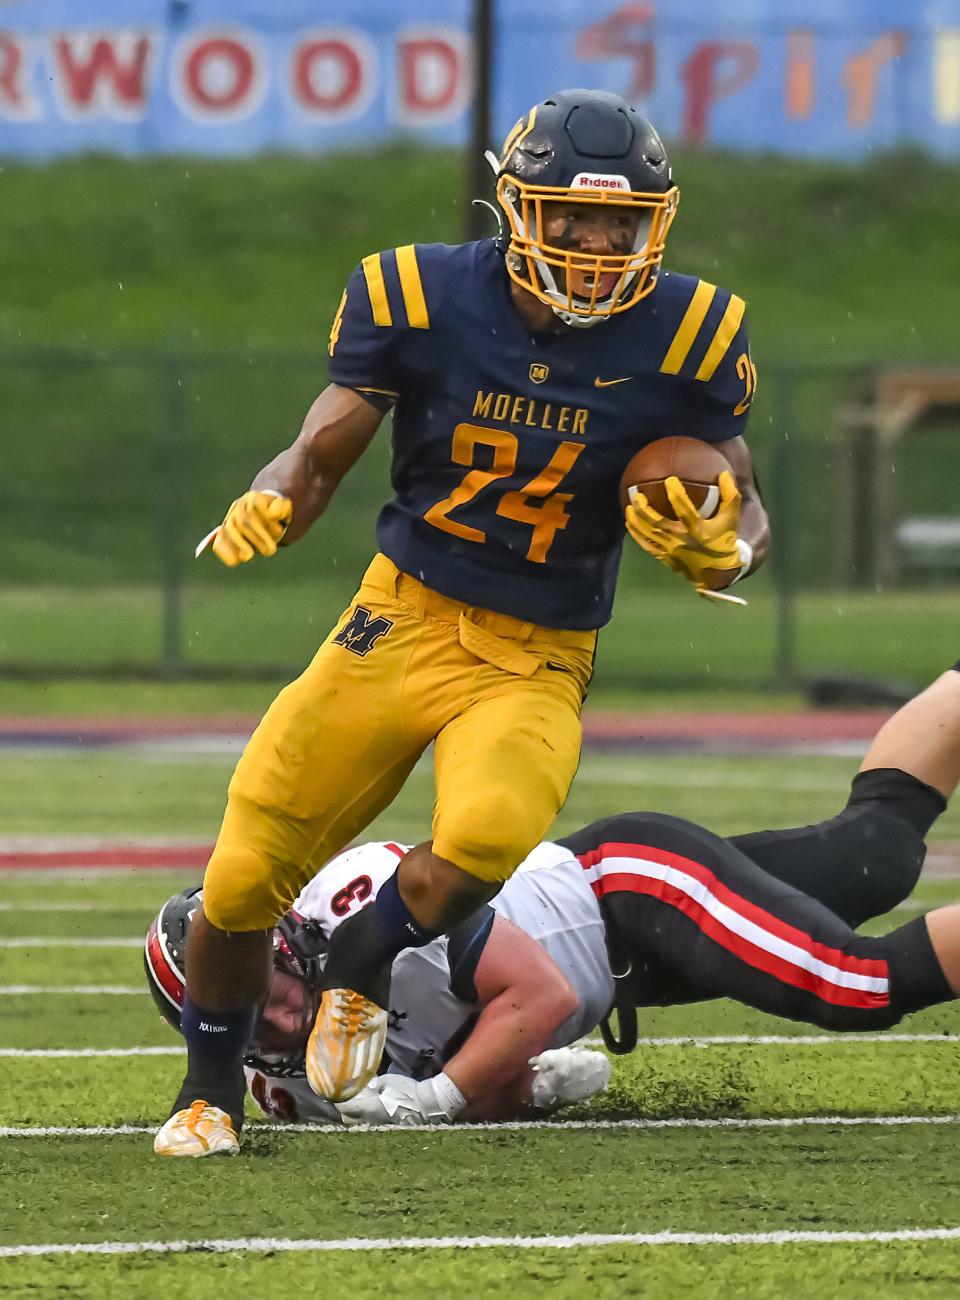 Jordan Marshall of Moeller runs the ball for a touchdown against East Central at Shea Stadium on Saturday, Sept. 3, 2022.